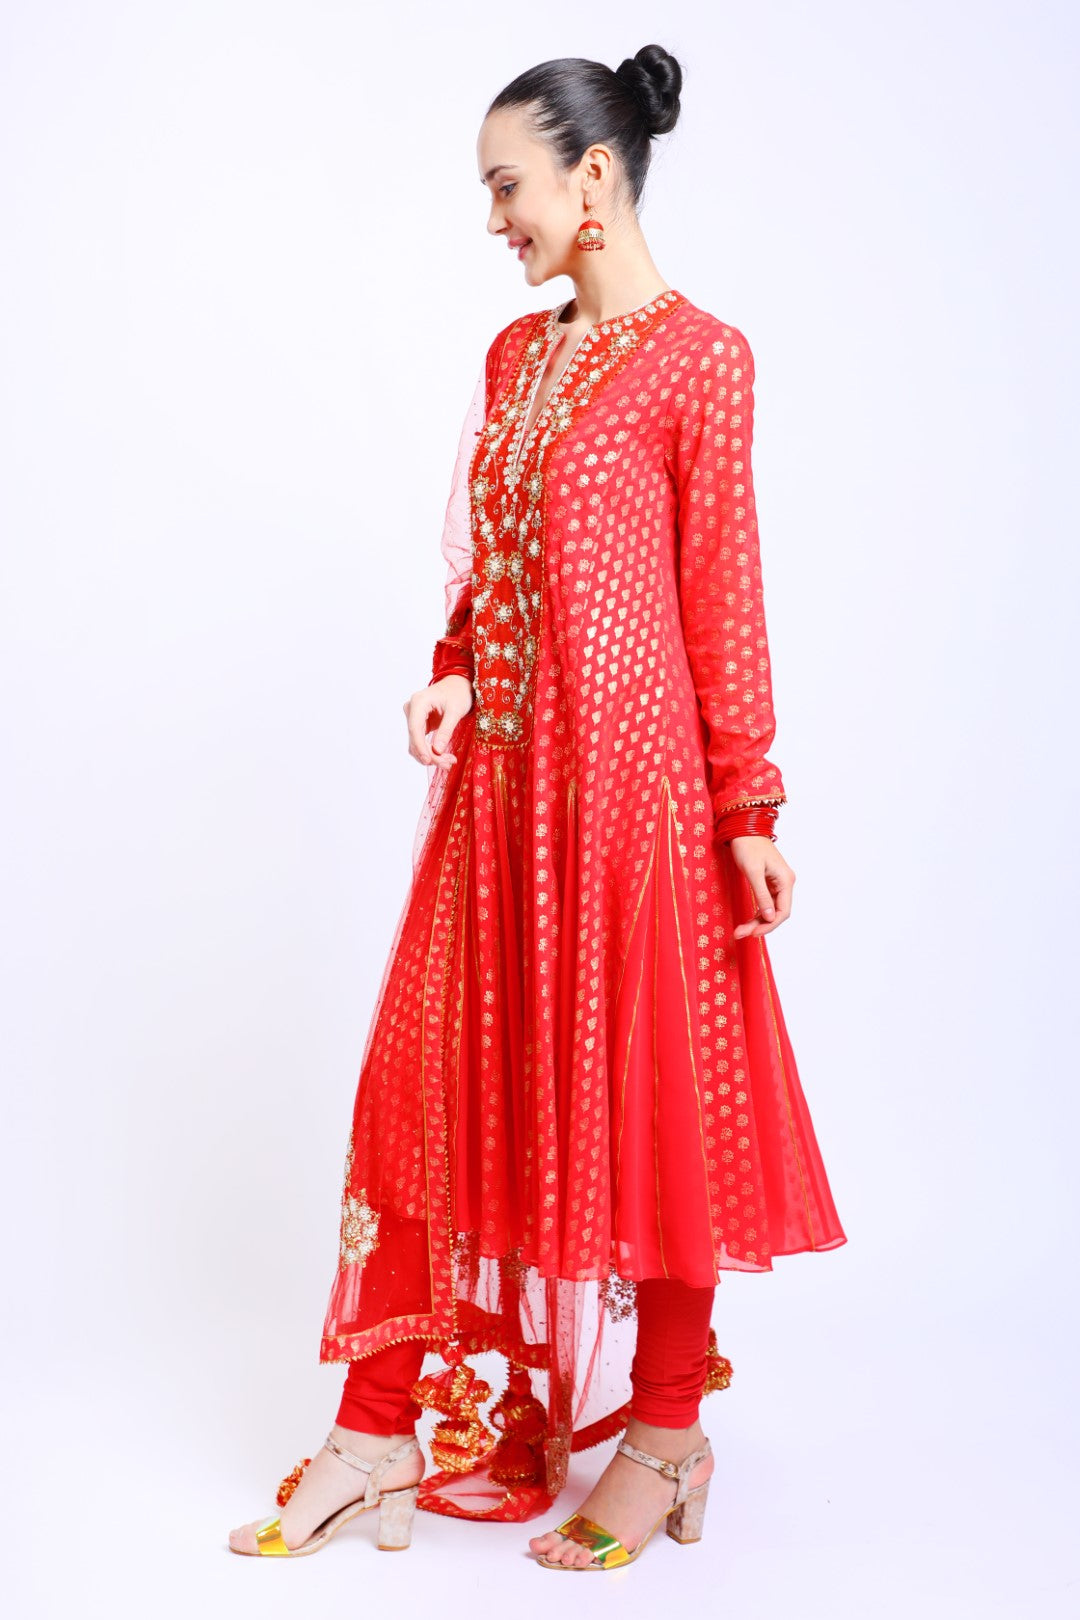 Coral Red Georgette Godet Kalis Kurta in Silk Embroidered Yoke paired with Emb Dupatta & Churidar